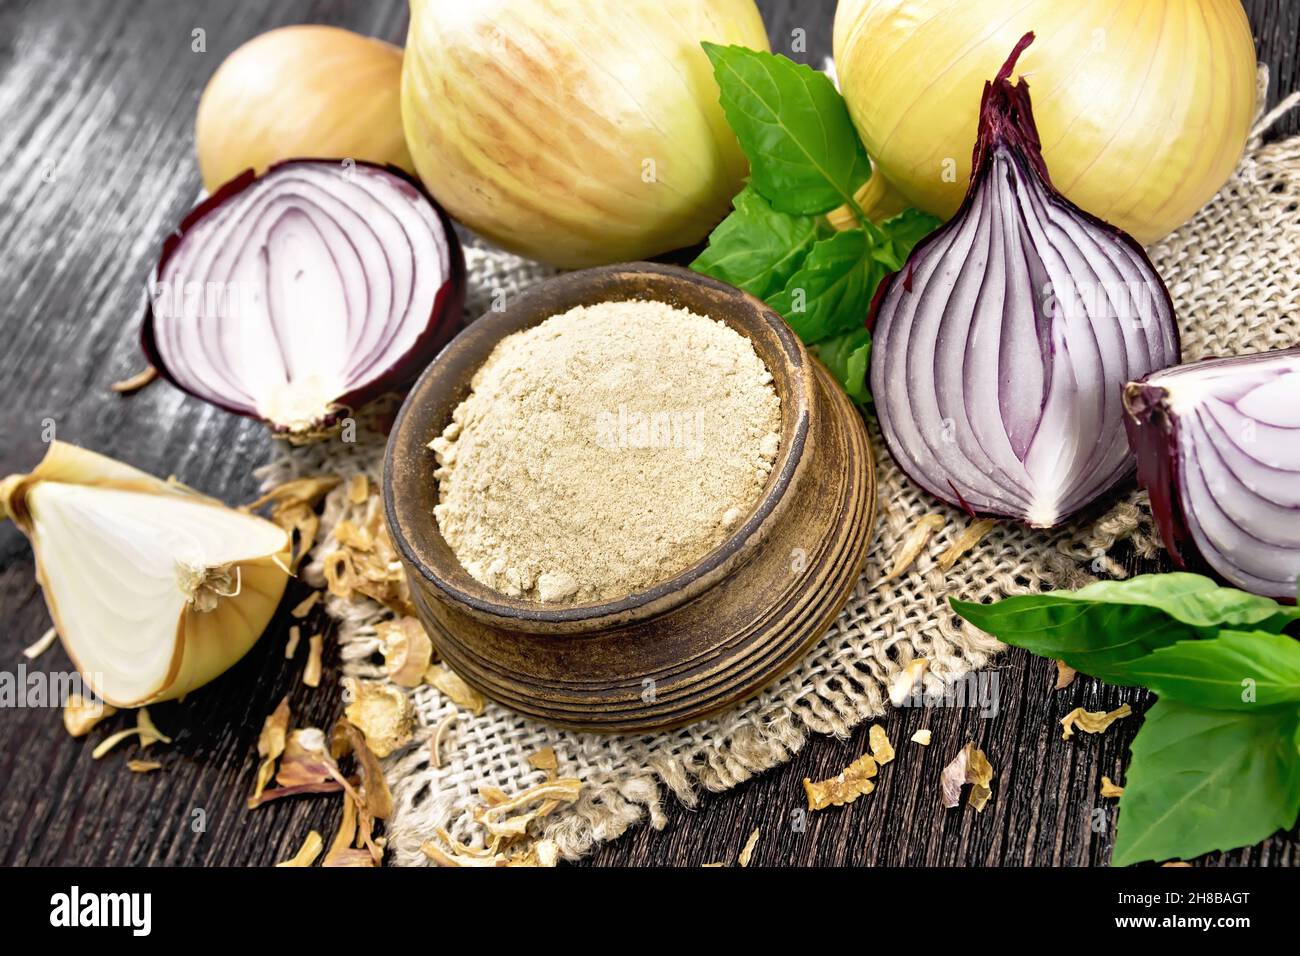 Onion powder in a bowl on sacking, purple and yellow onions, dried onion flakes and basil on wooden board background Stock Photo